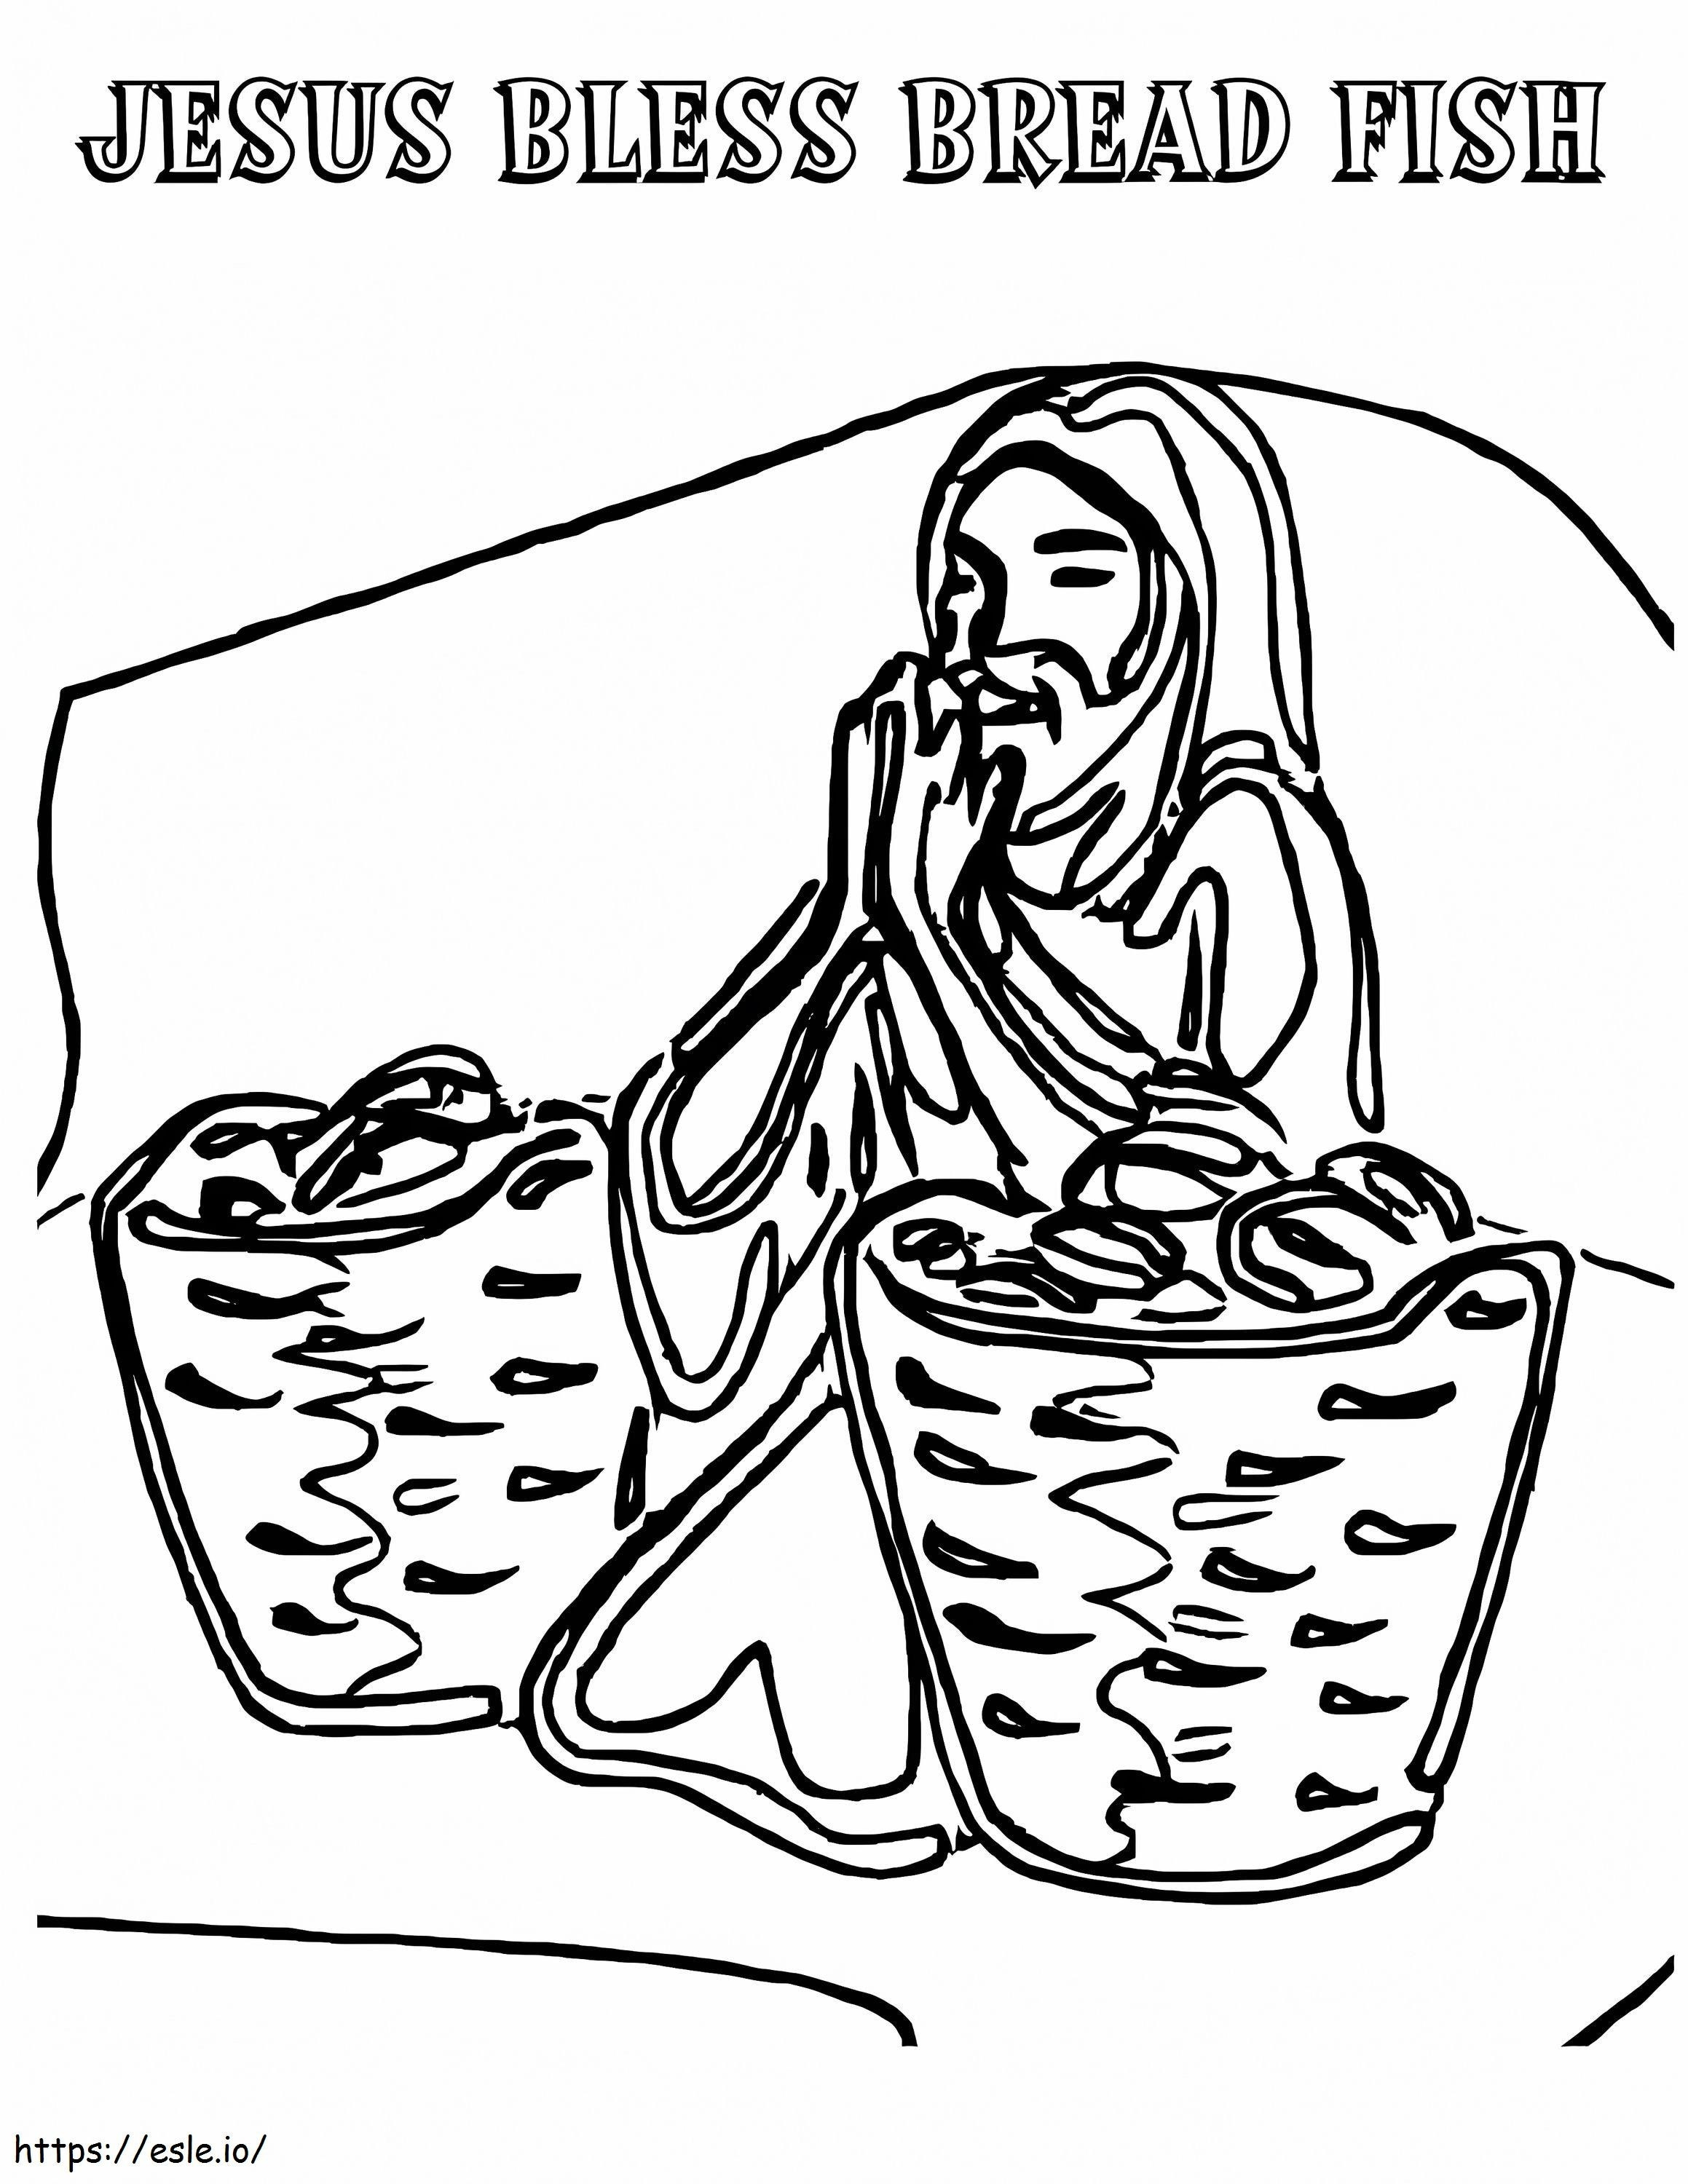 Jesus Bless Bread Fish coloring page